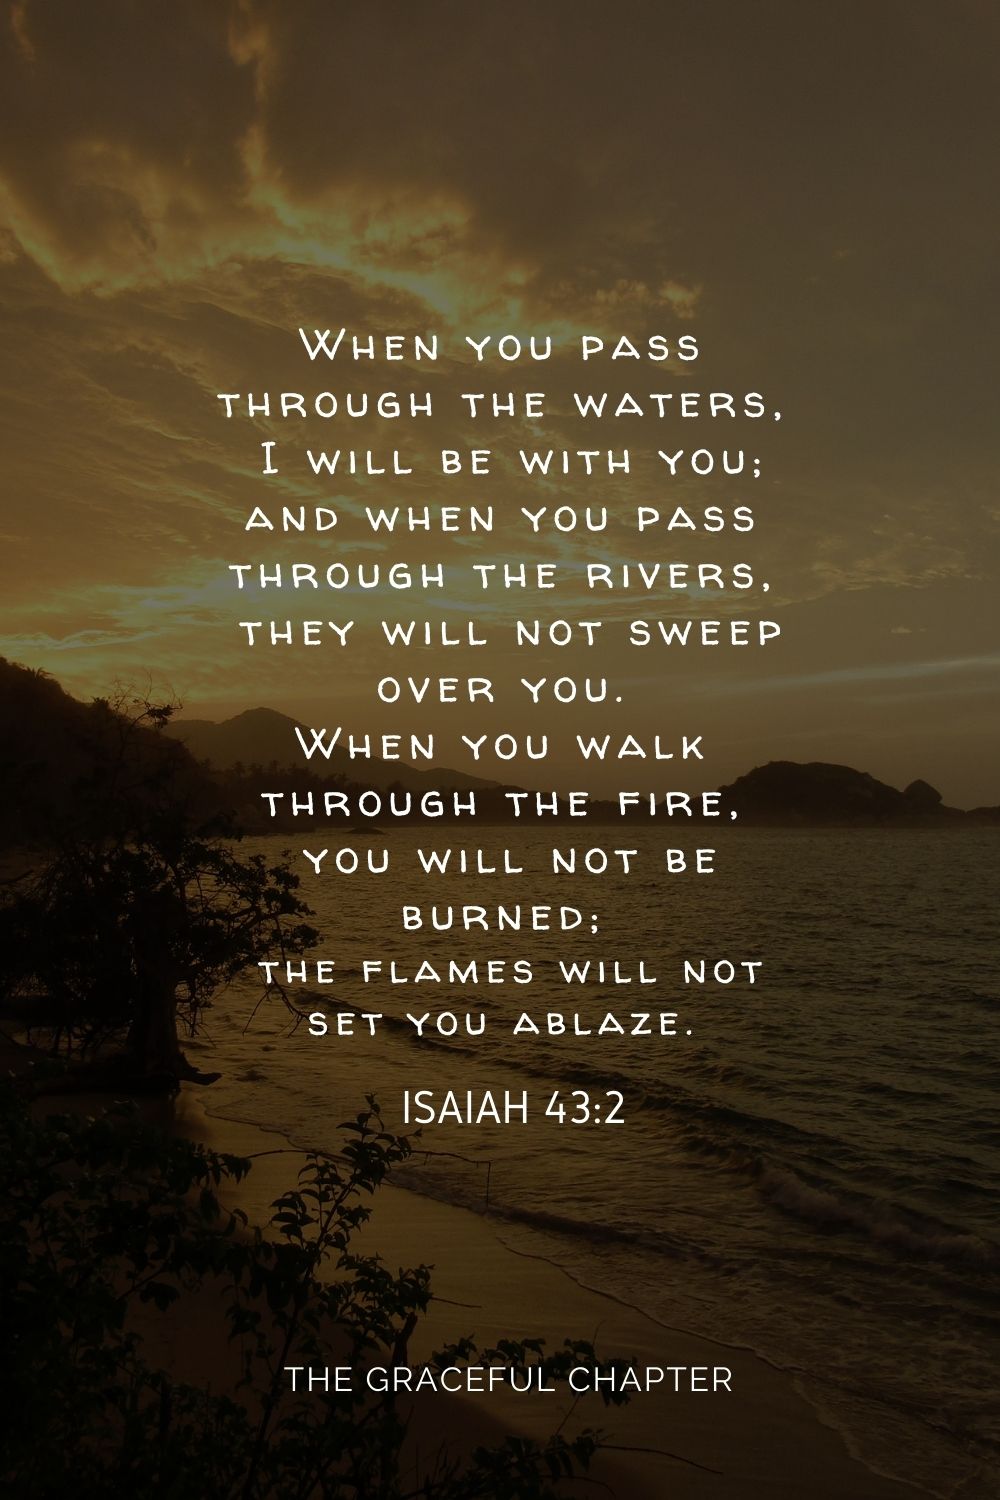 When you pass through the waters, I will be with you; and when you pass through the rivers, they will not sweep over you. When you walk through the fire, you will not be burned; the flames will not set you ablaze. Isaiah 43:2